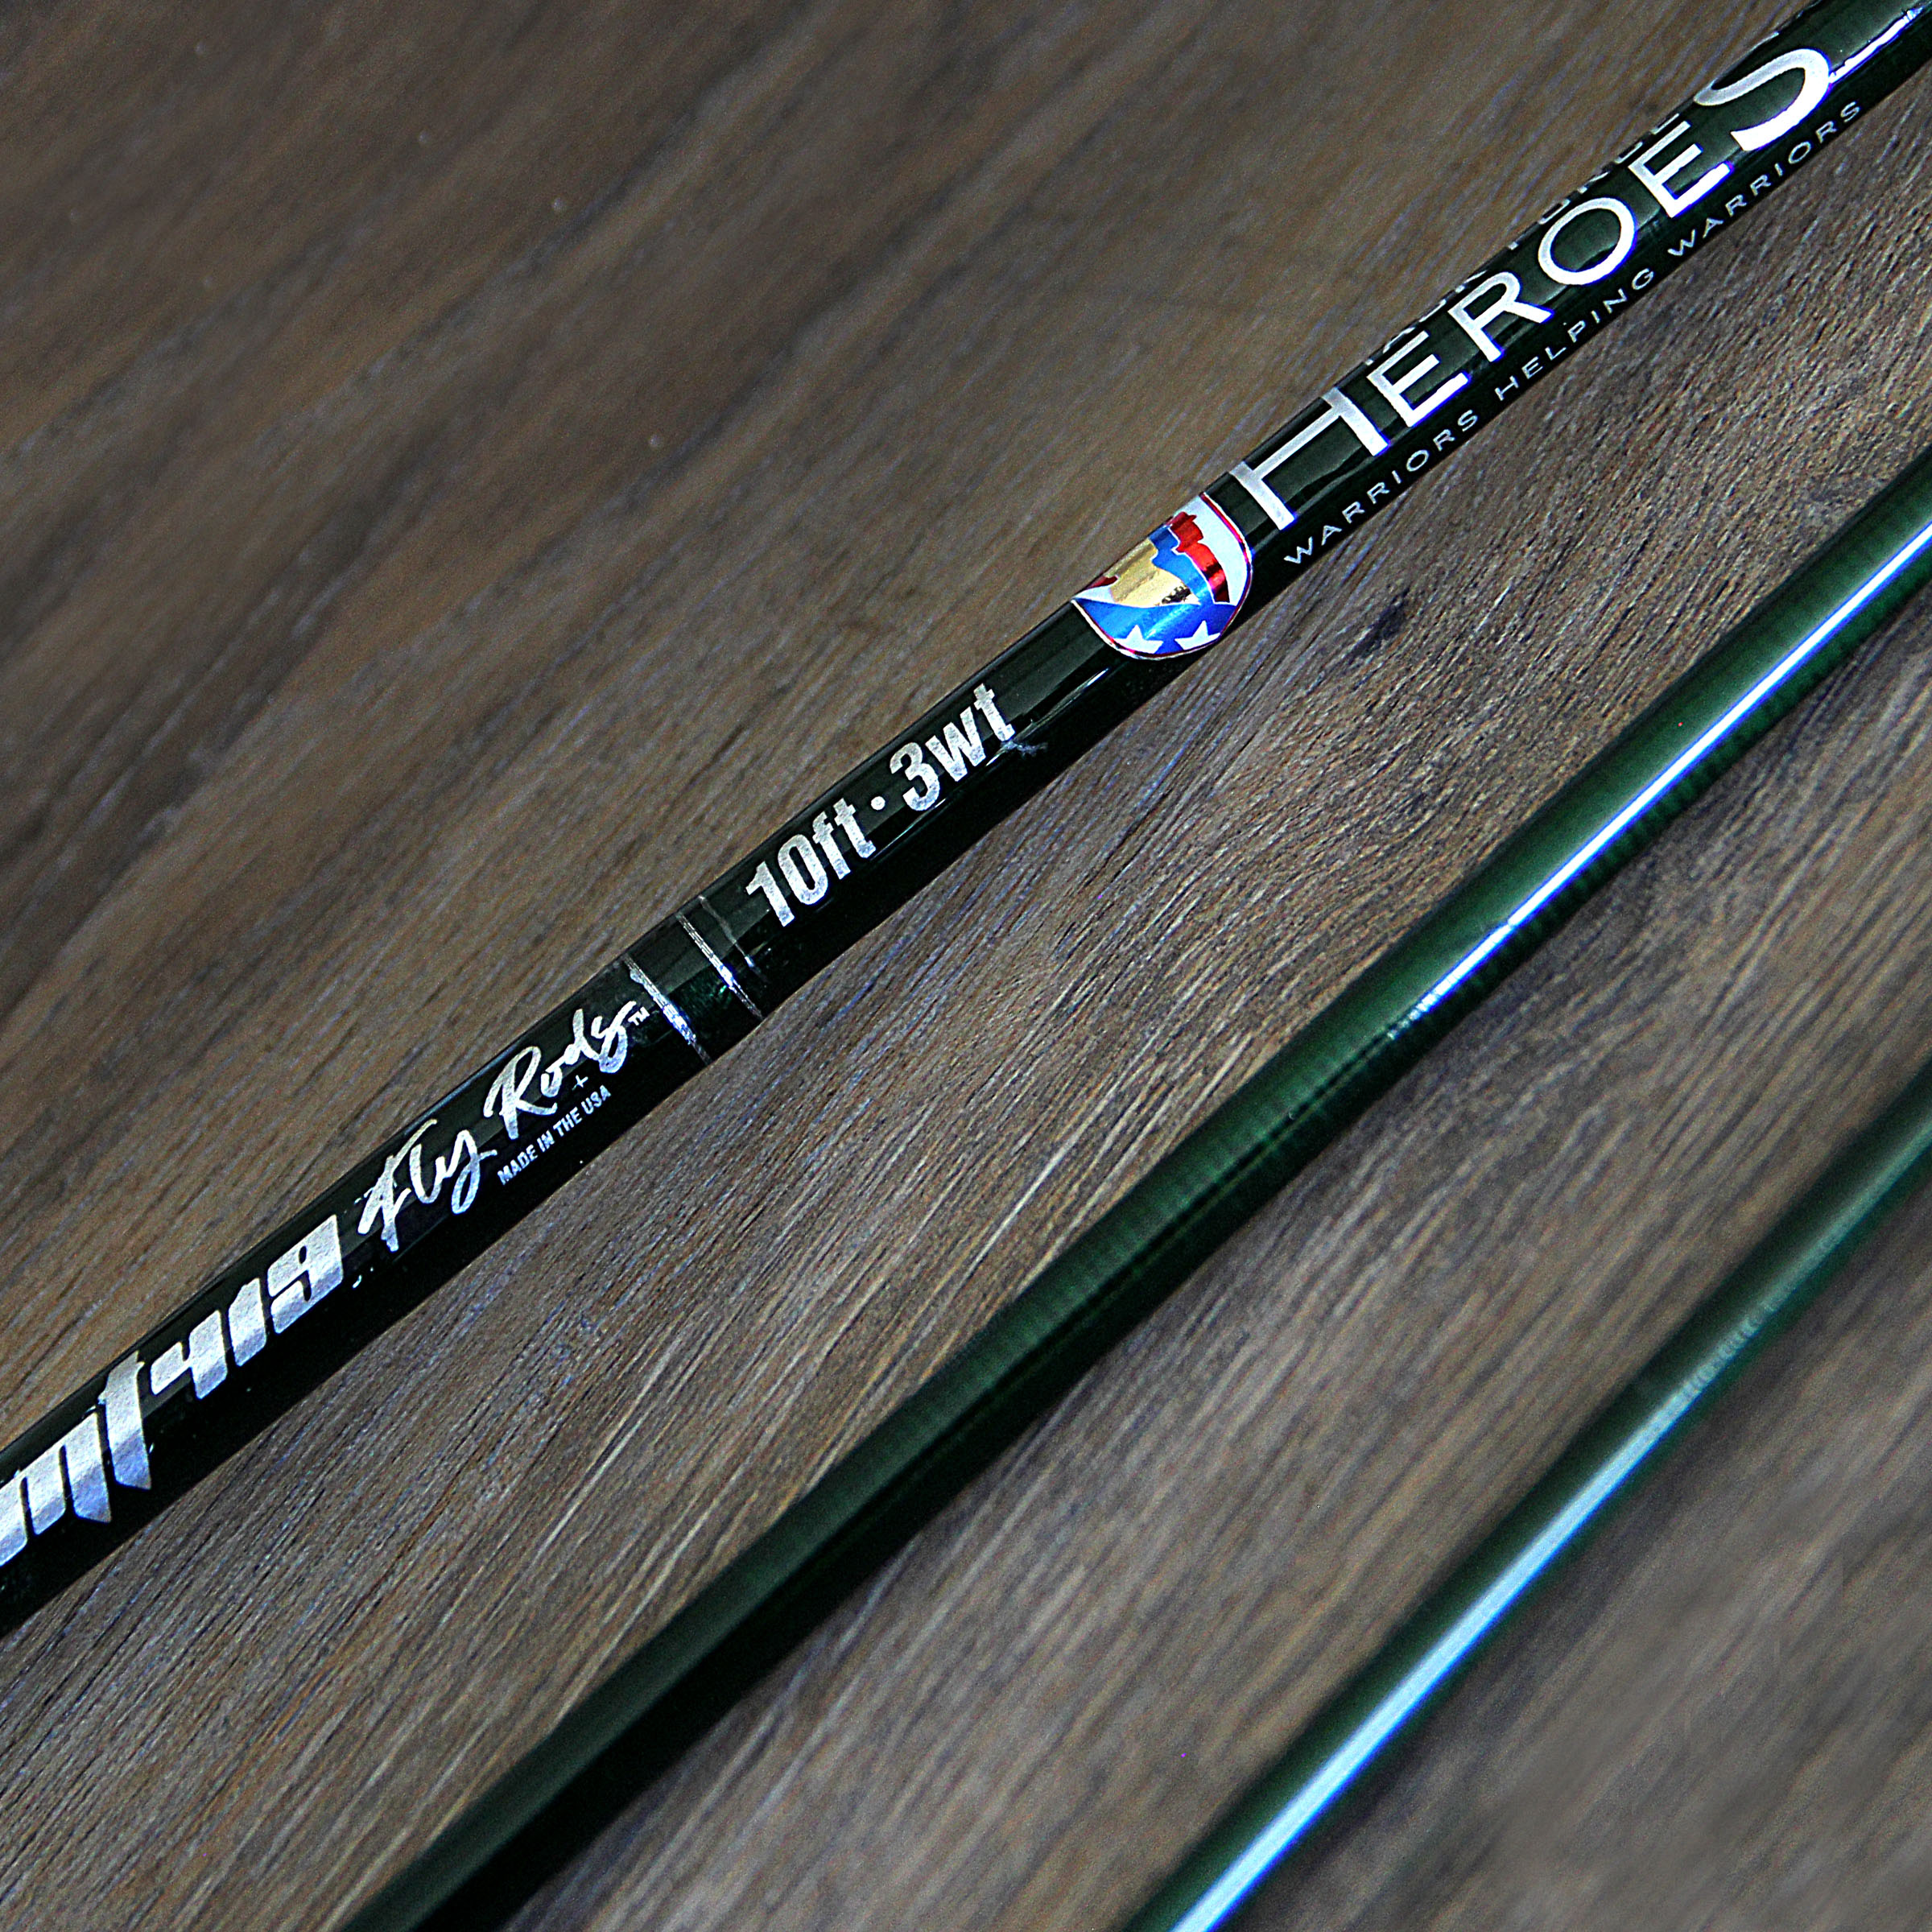 Euro Nymph 10'0 4wt 4pc IM7 Forest Green Graphite Fly Rod Blank